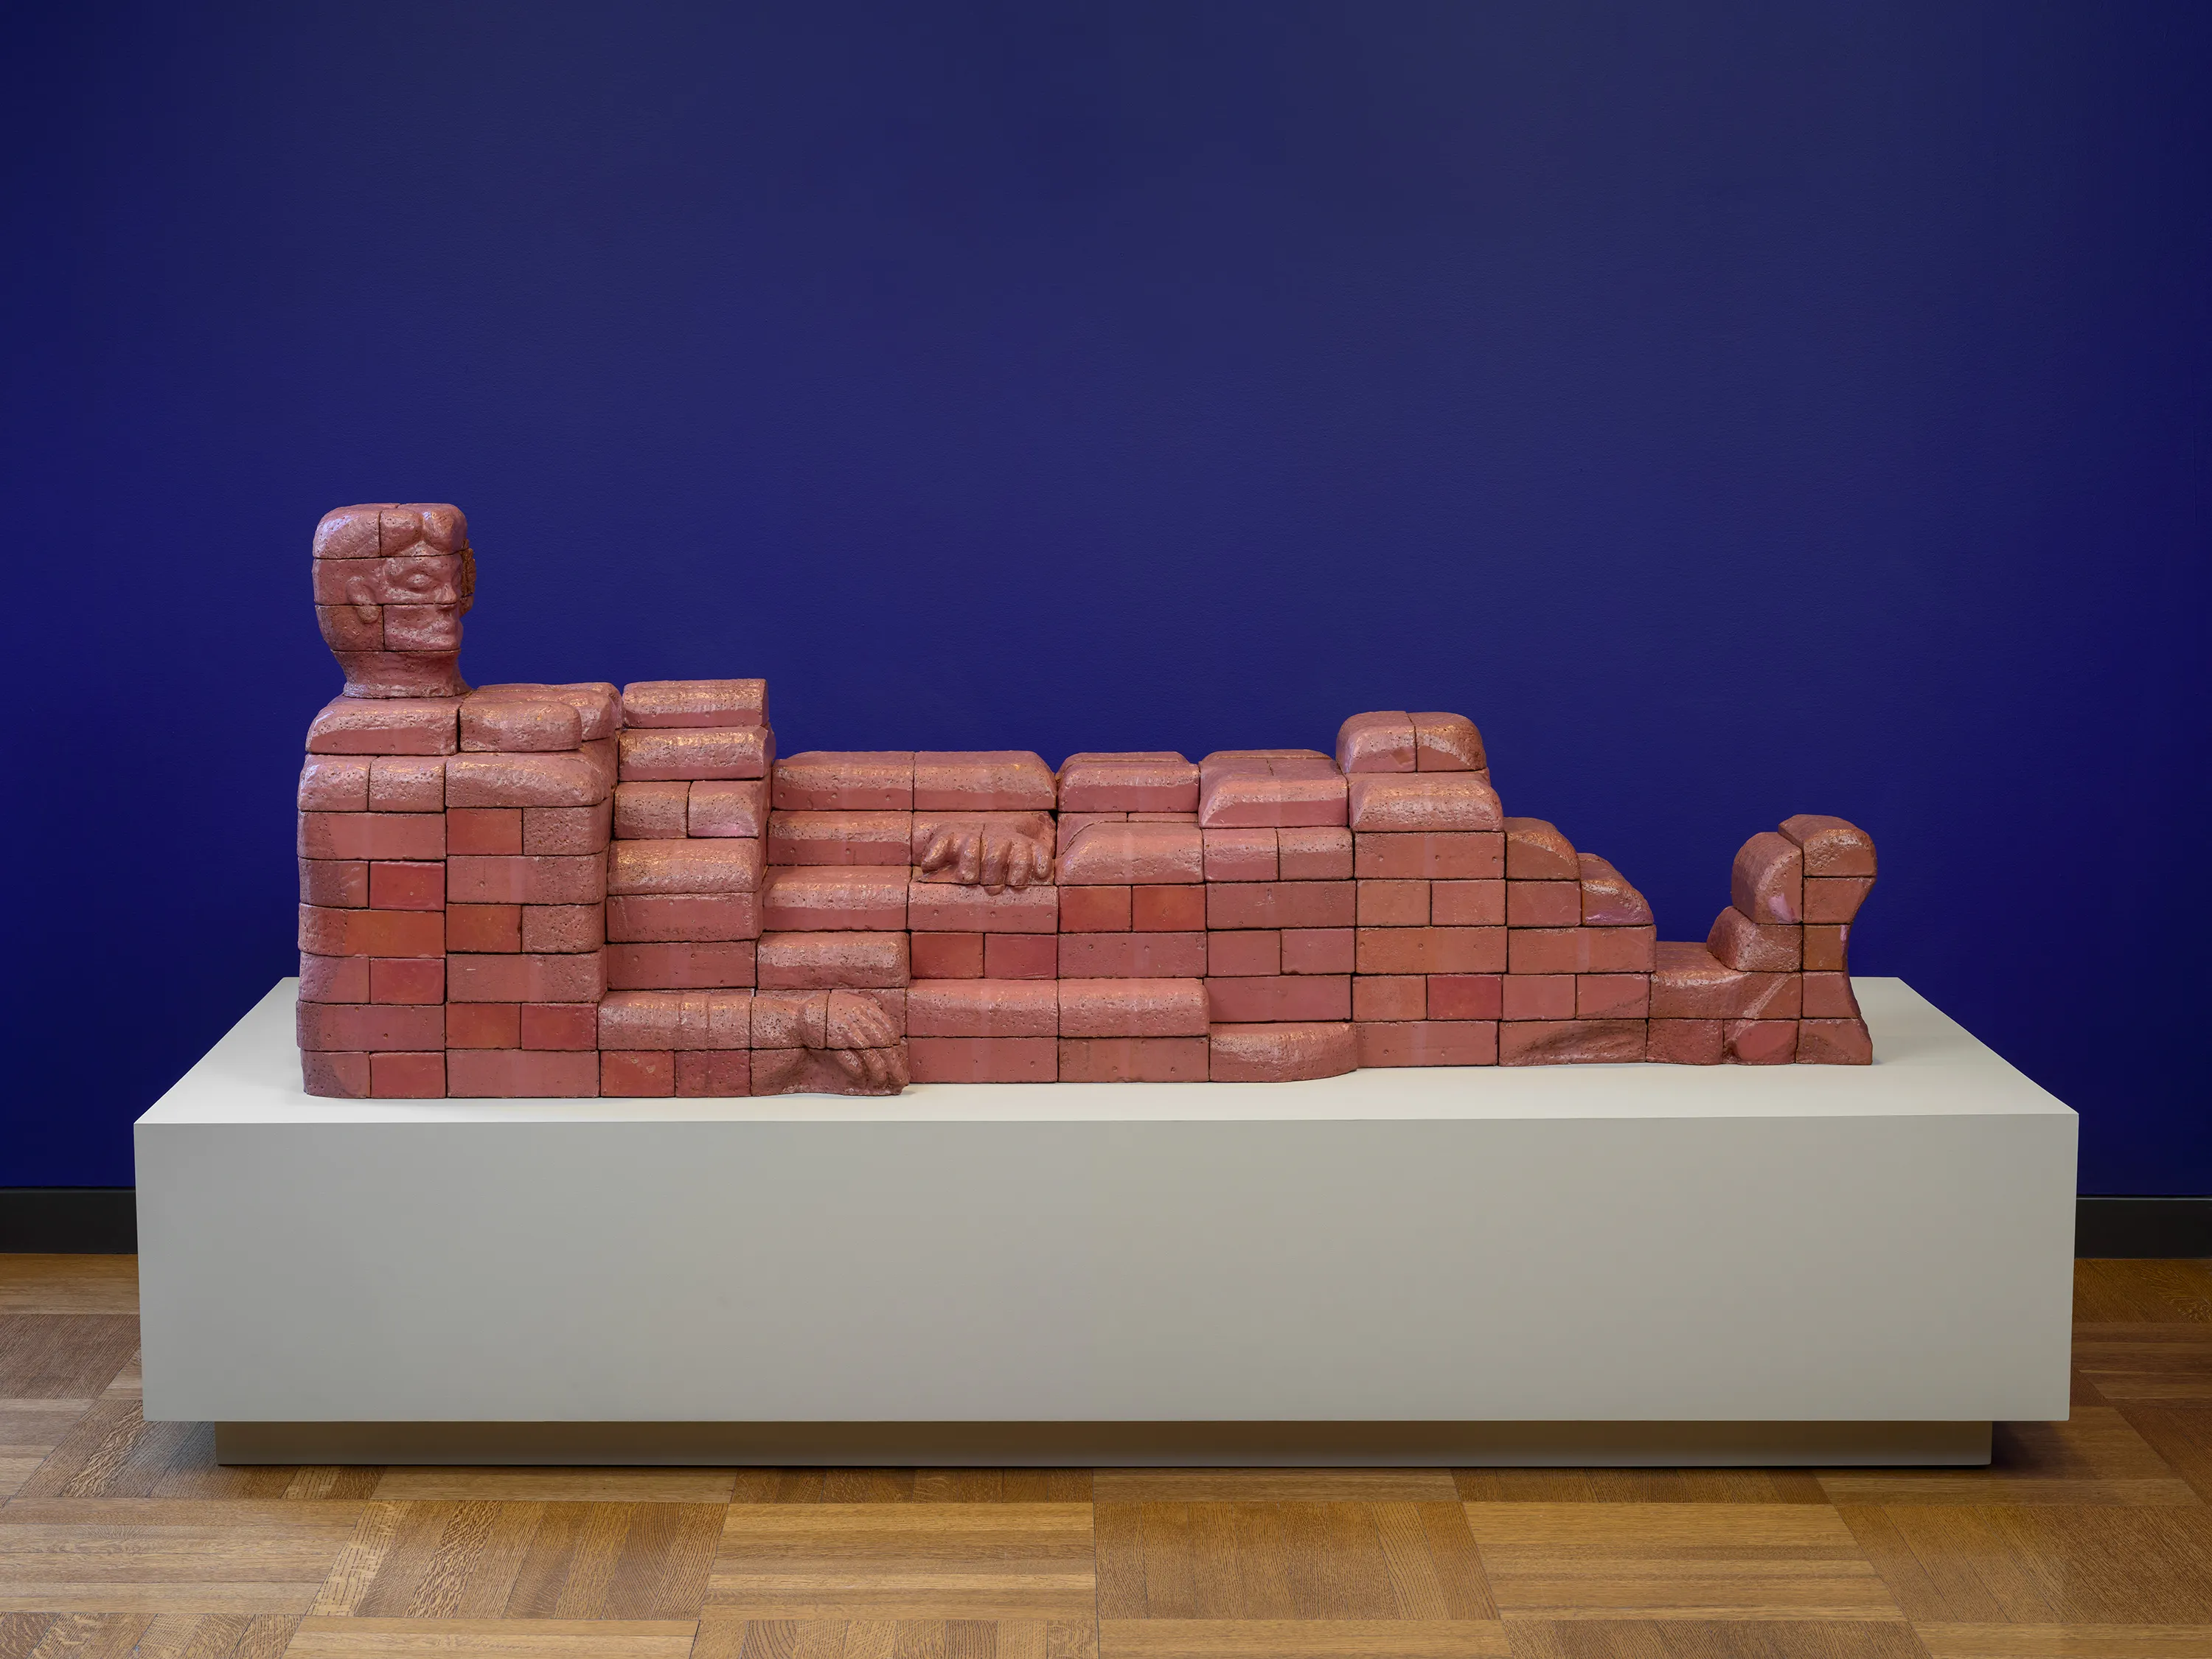 Sculpture of terracotta bricks approximating the shape of a reclining woman in front of a purple wall.